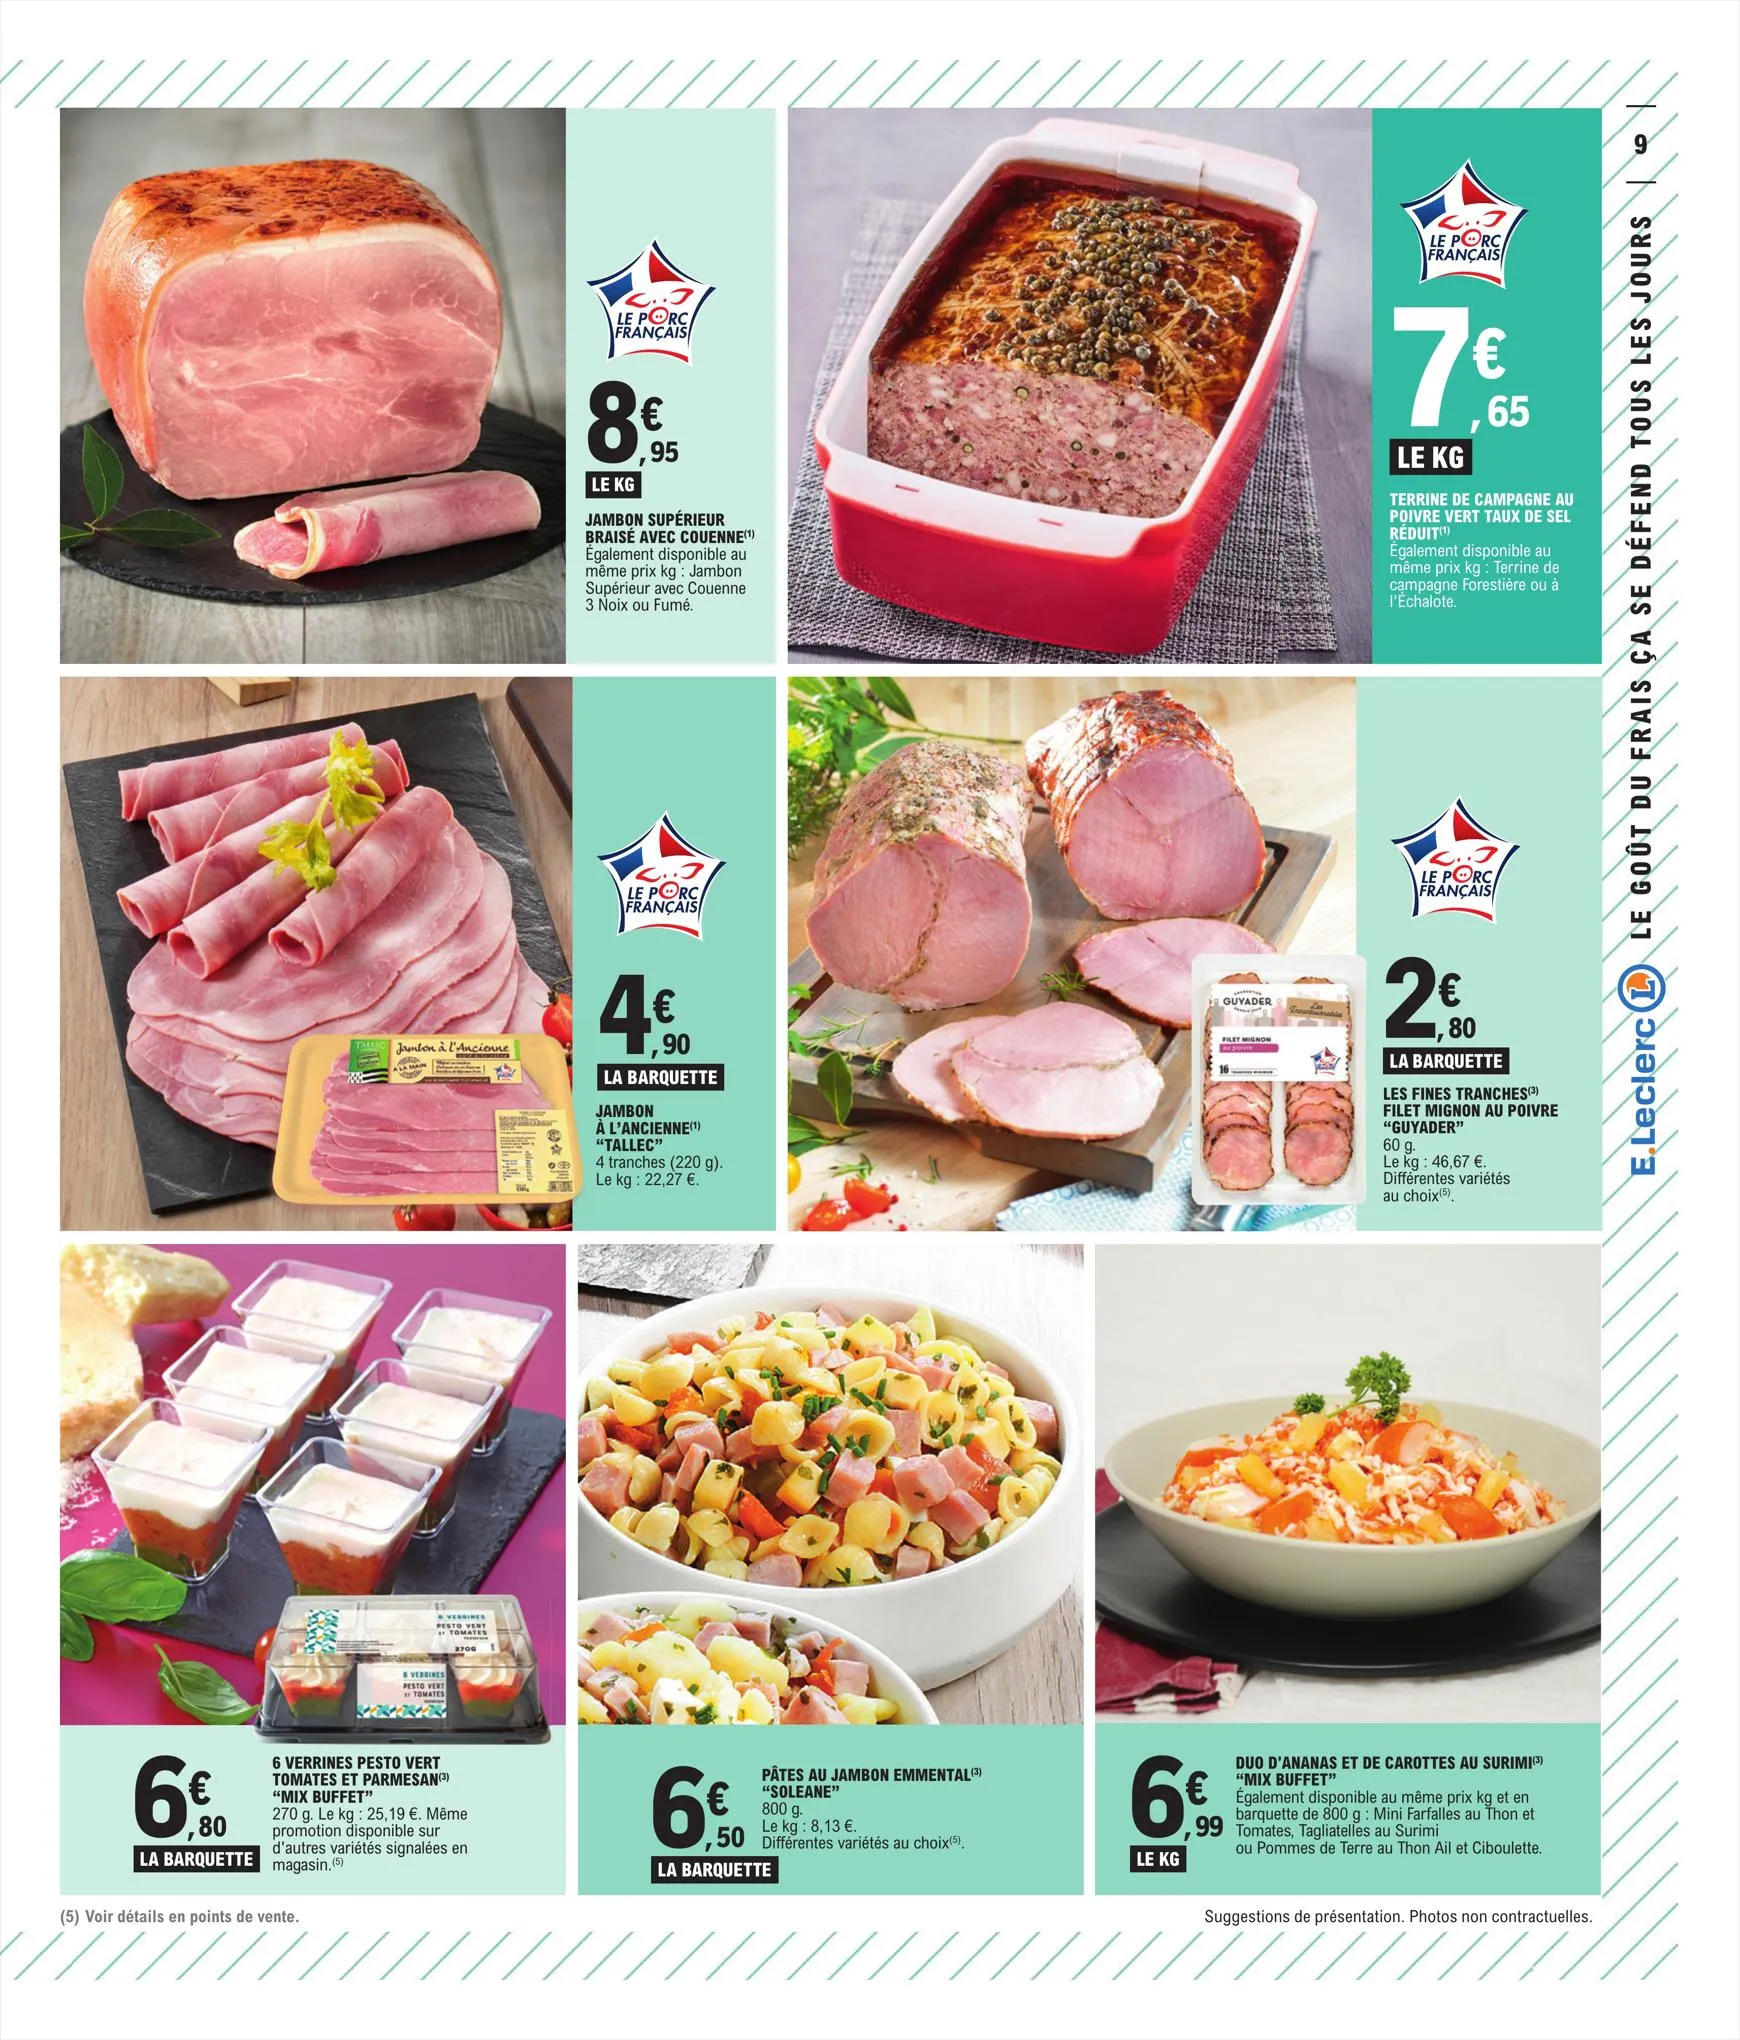 Catalogue Relance Alimentaire 10 - Mixte, page 00009